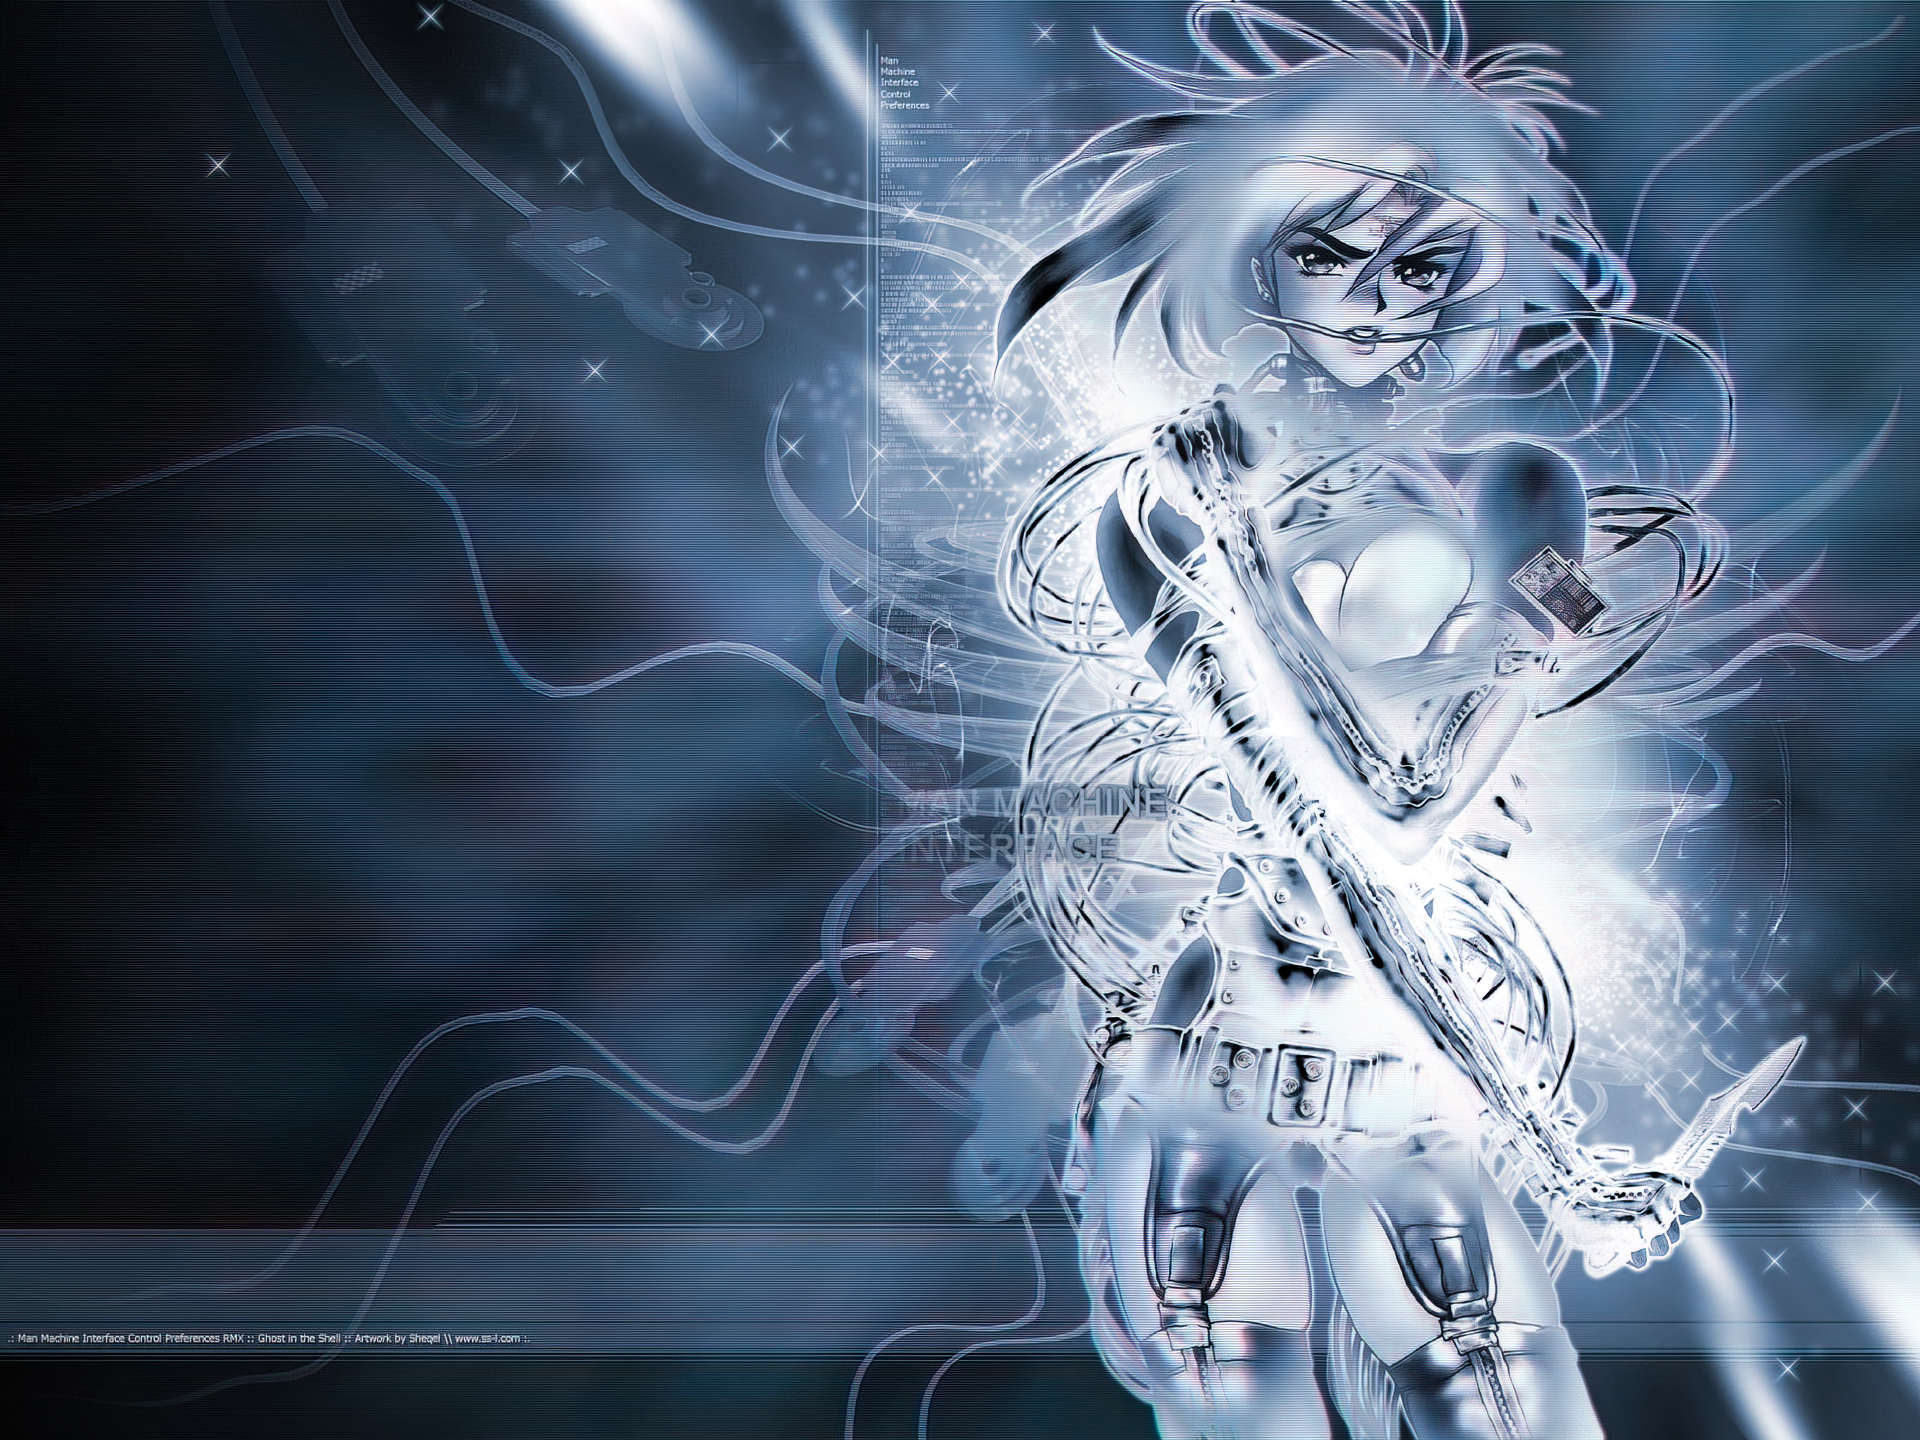 Ghost In The Shell HD Wallpaper by Masamune Shirow